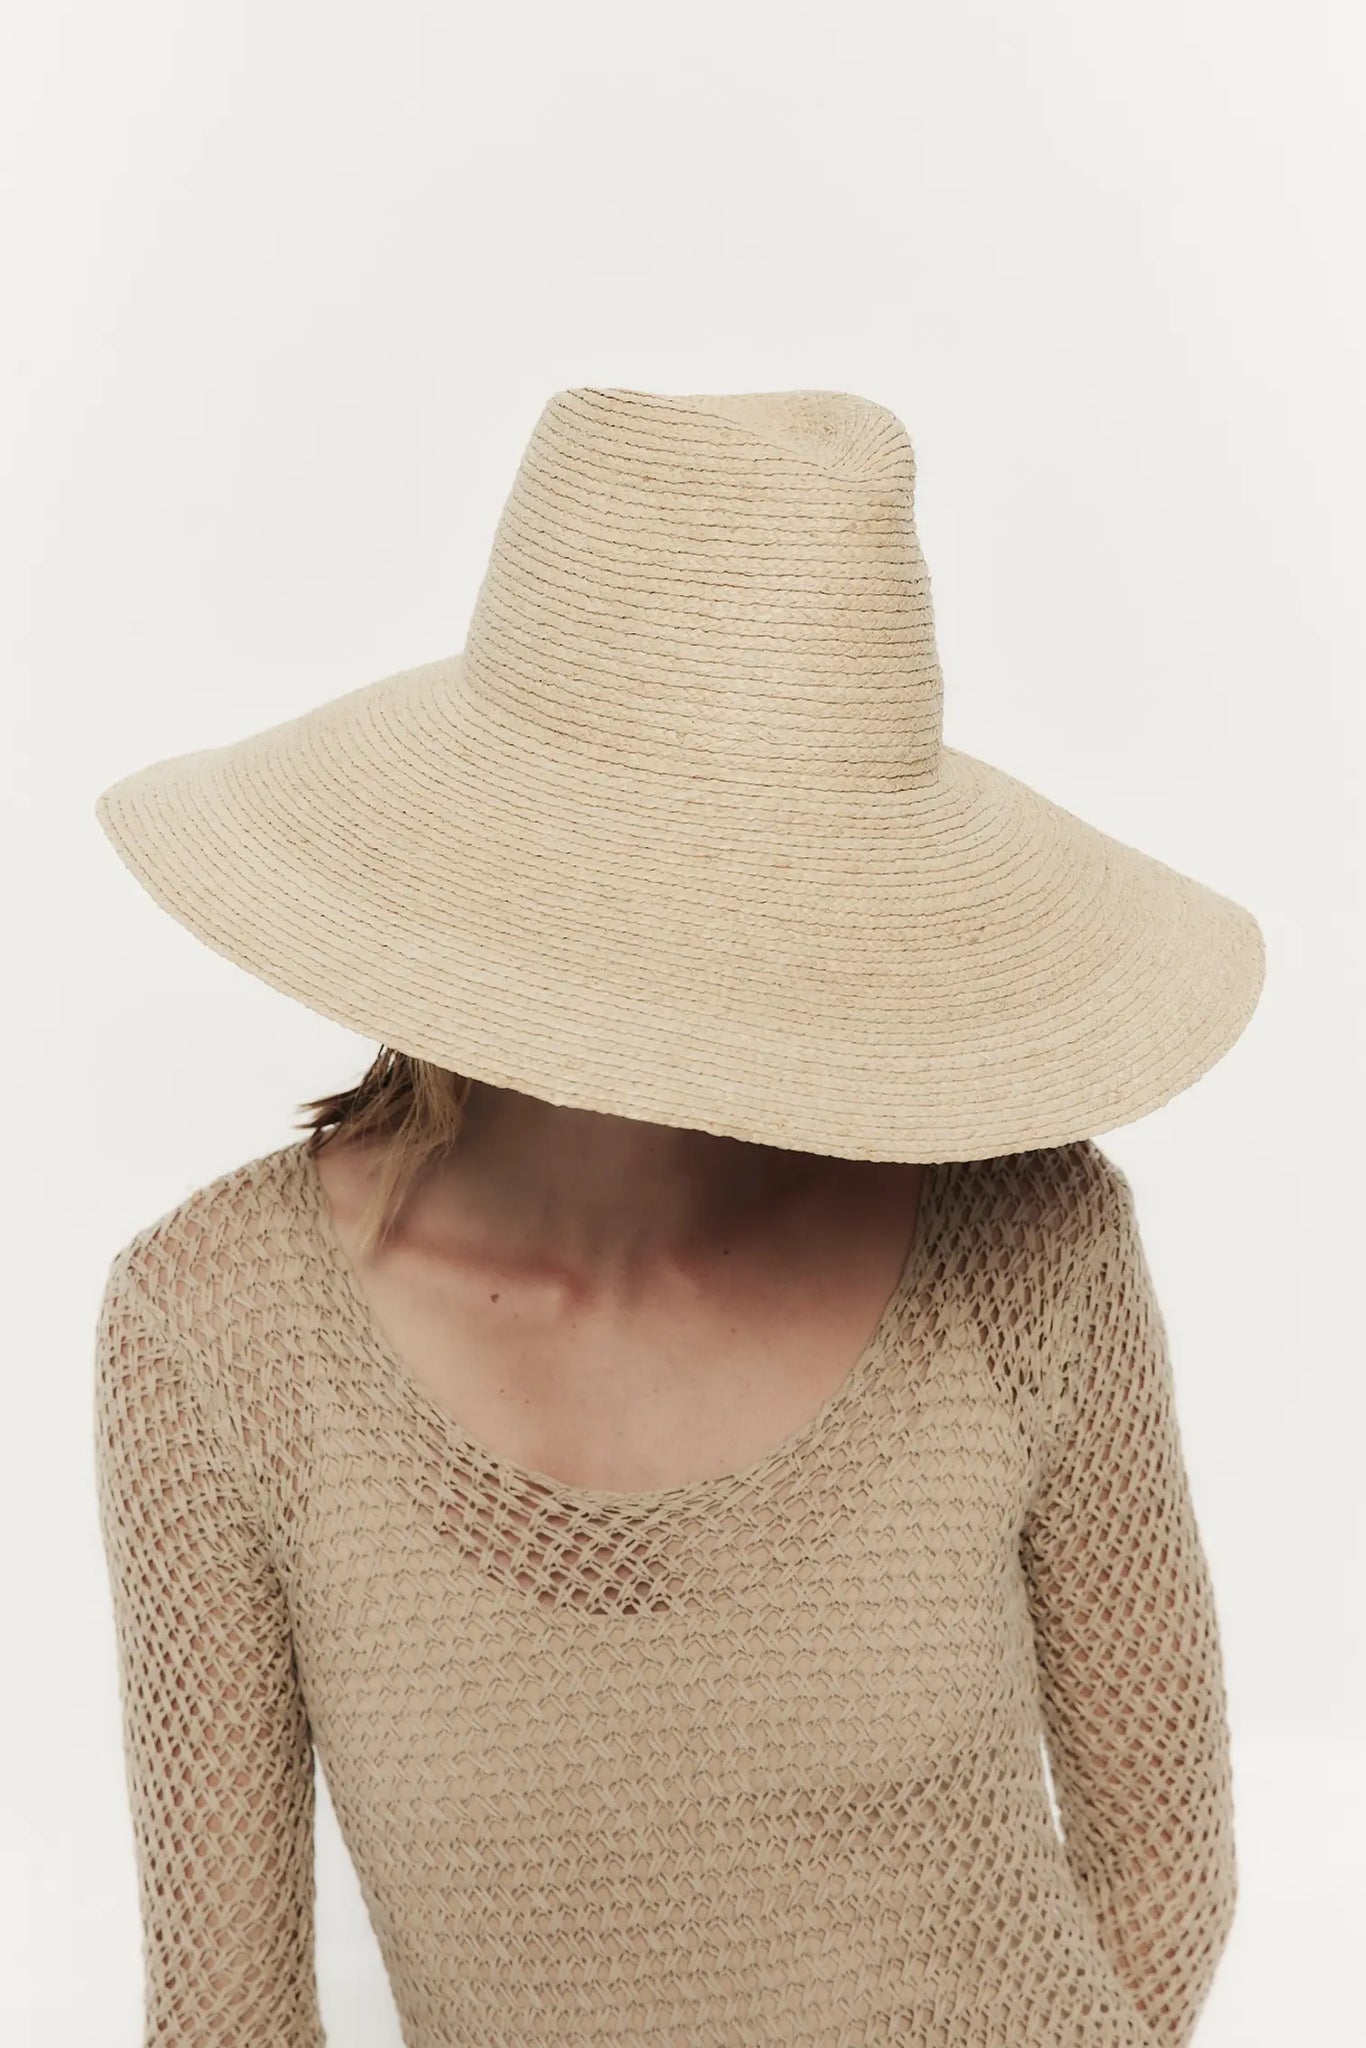 Tinsely Straw Hat in Natural